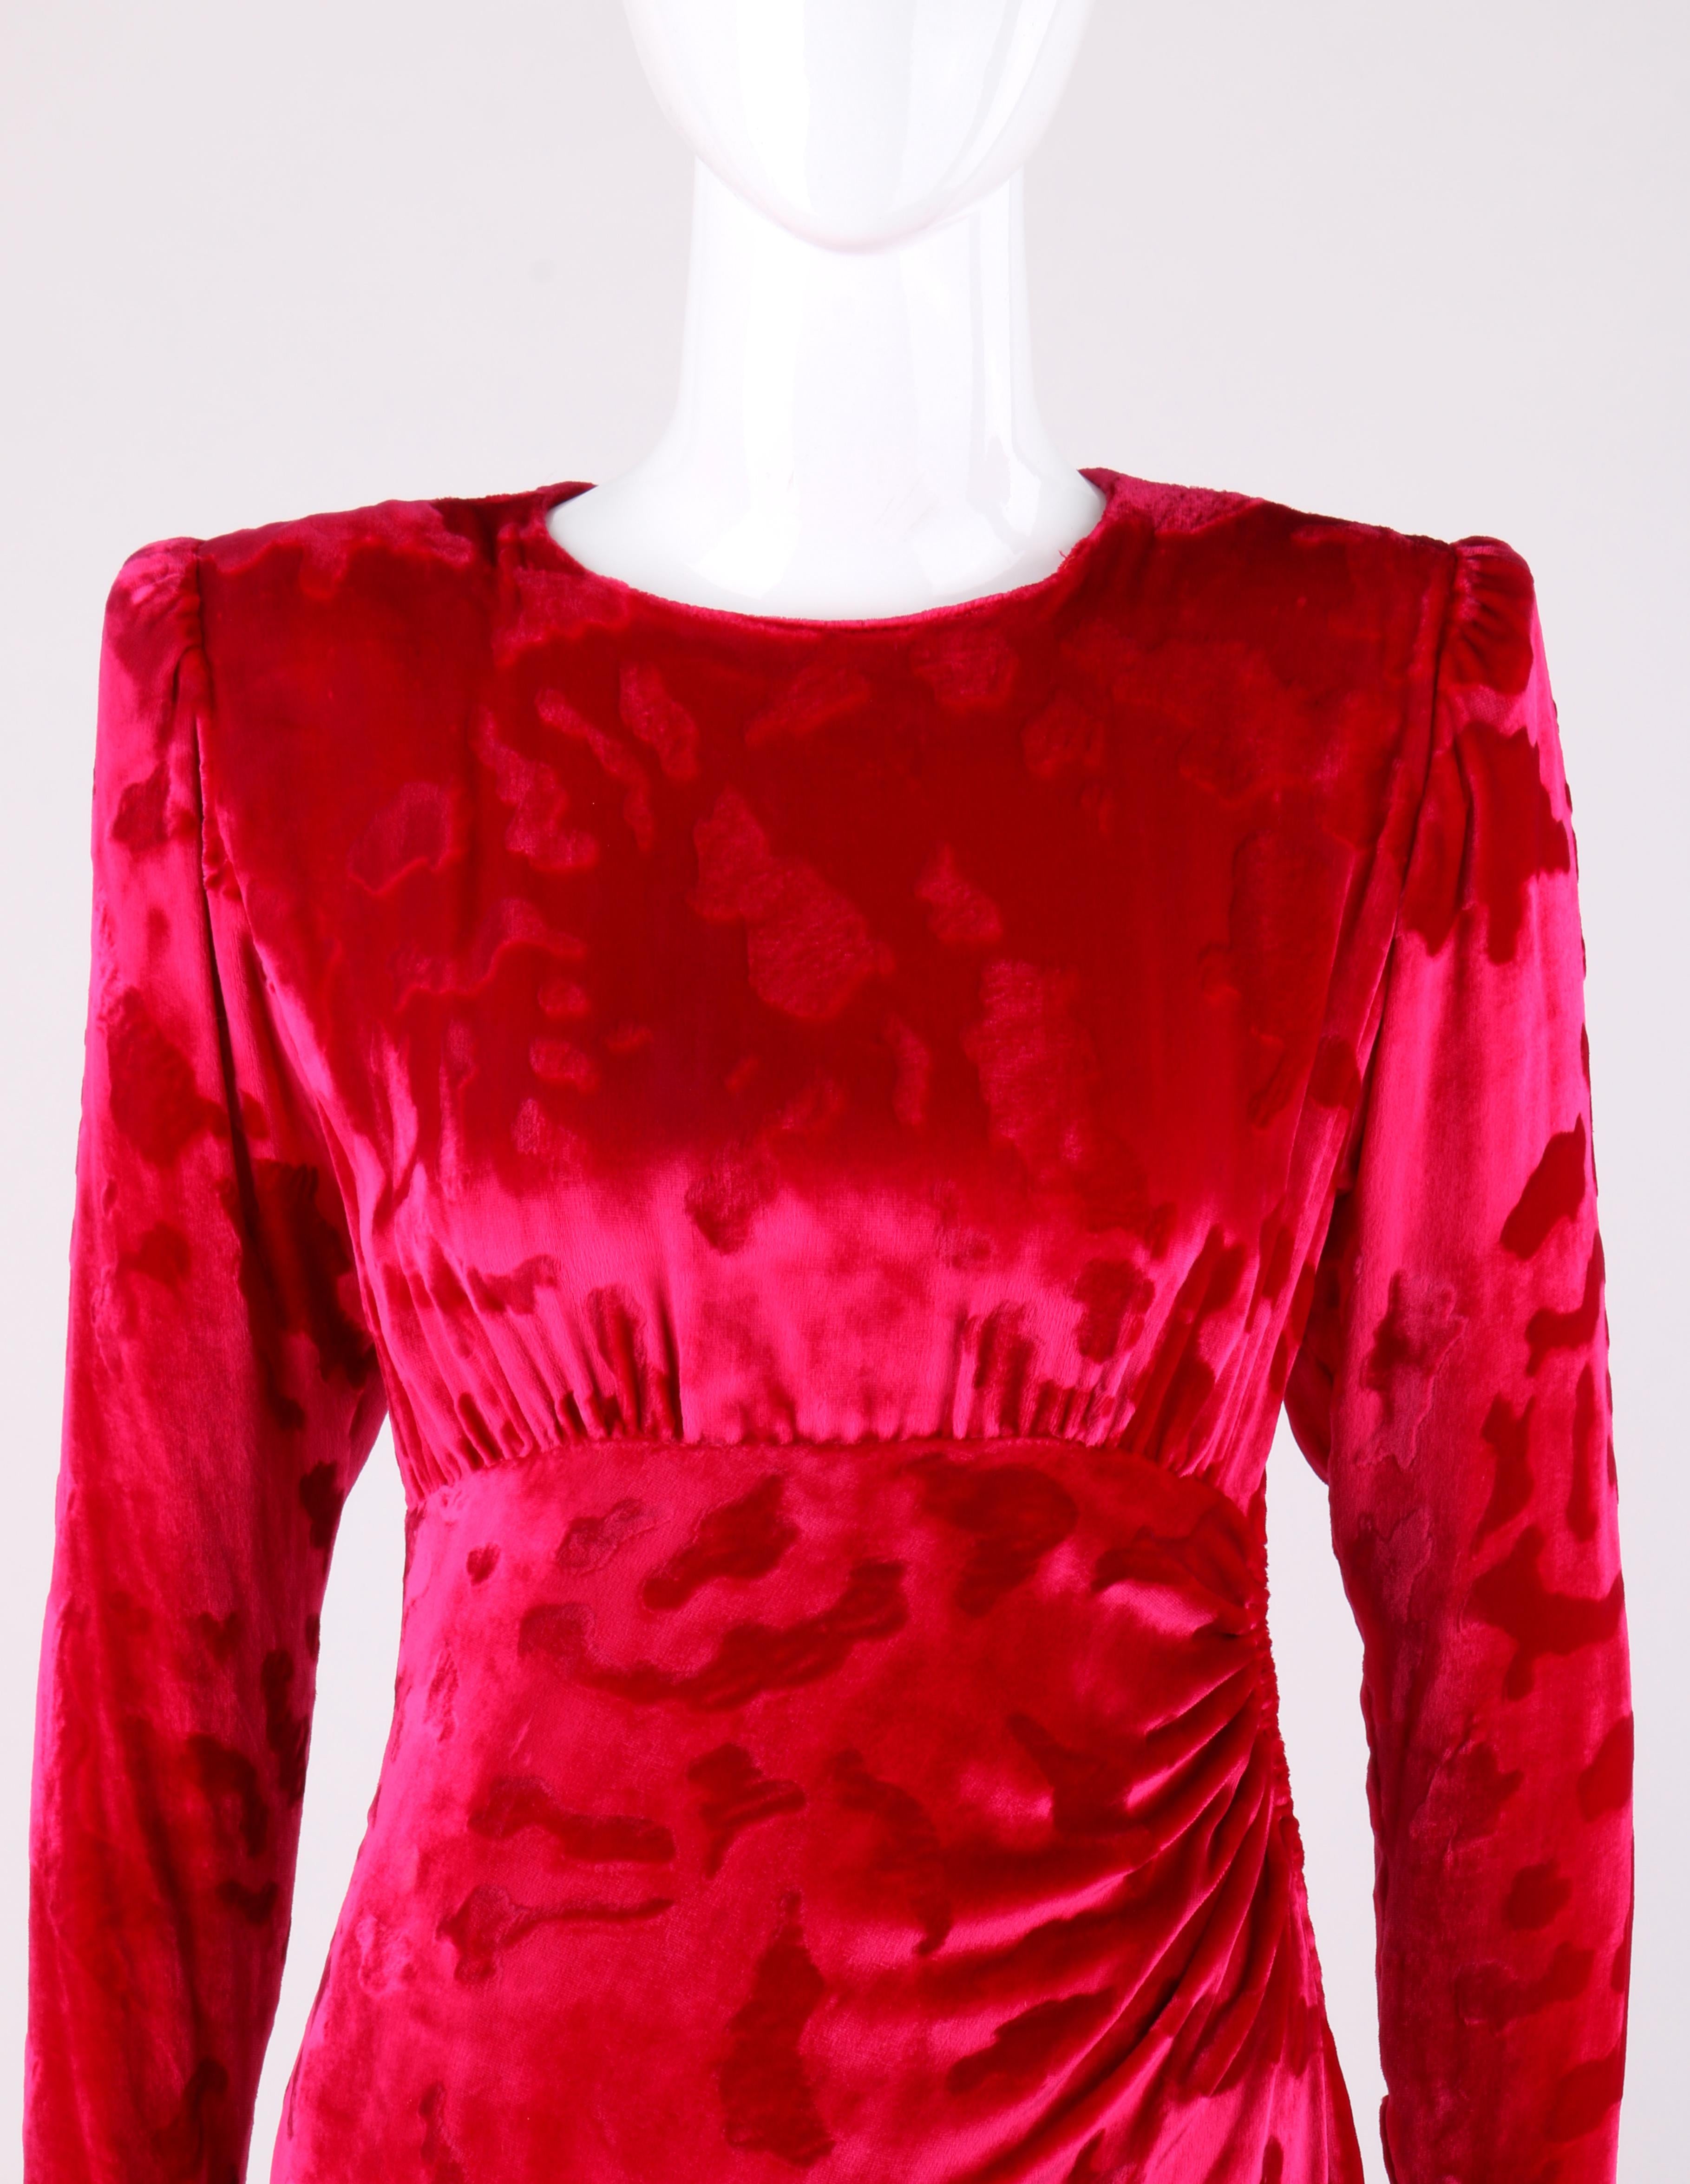 GIVENCHY c.1990's Haute Couture Fuchsia Pink Leopard Print Velvet Evening Dress In Good Condition For Sale In Thiensville, WI